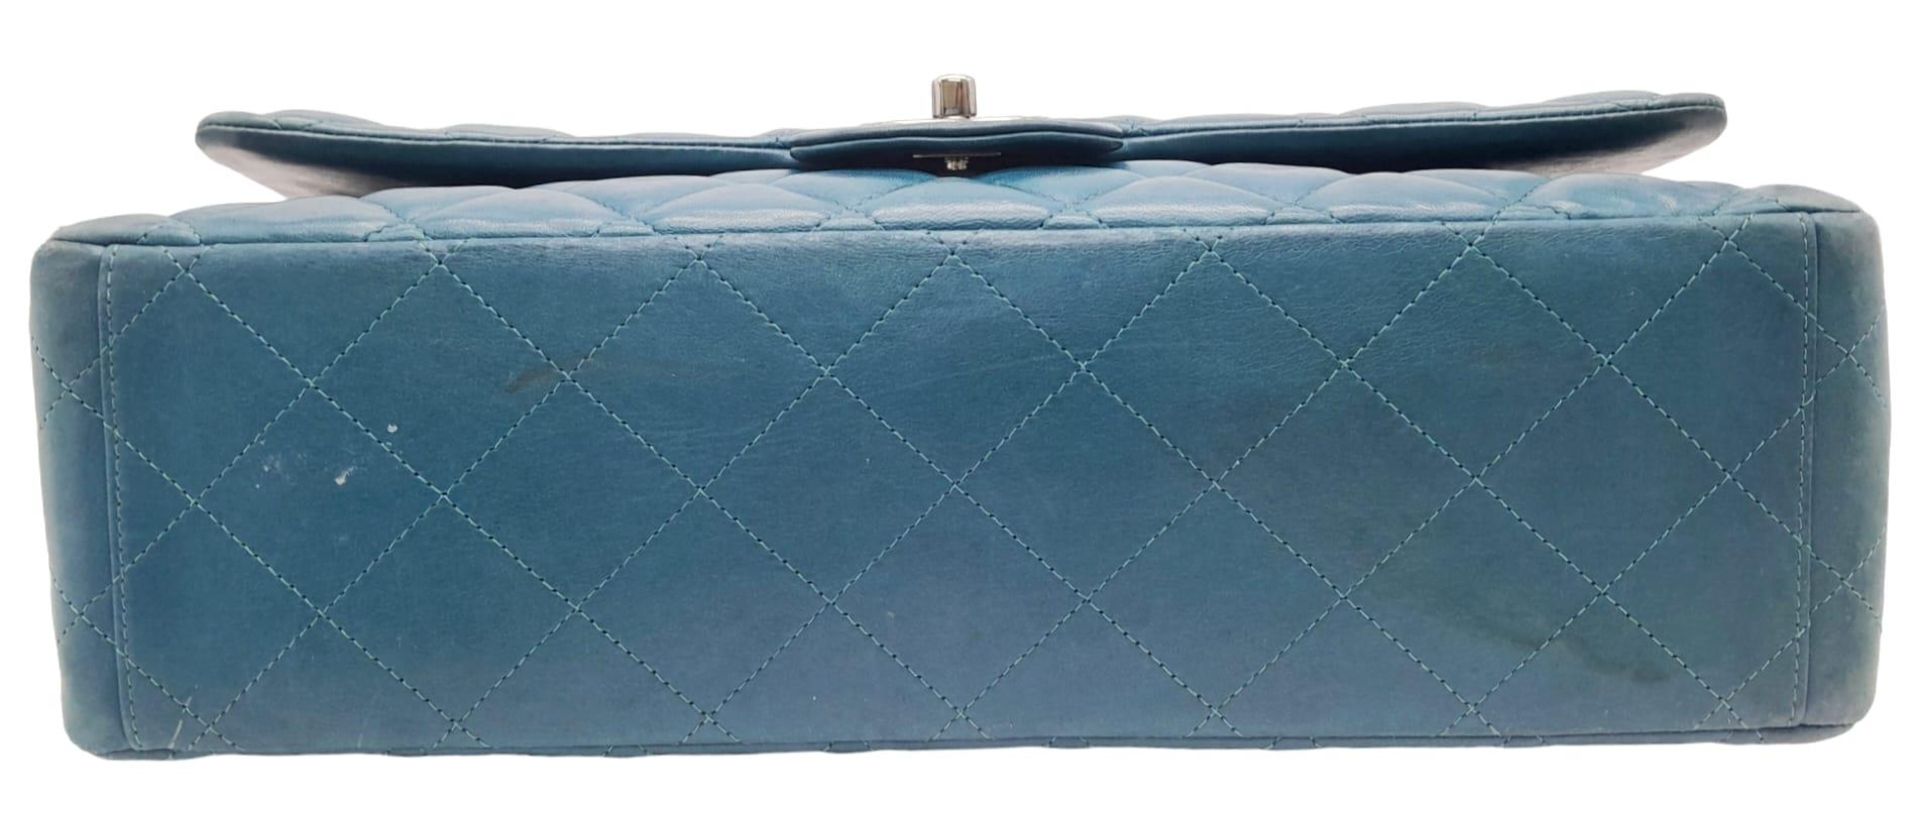 A Chanel Teal Jumbo Classic Double Flap Bag. Quilted leather exterior with silver-toned hardware, - Image 5 of 14